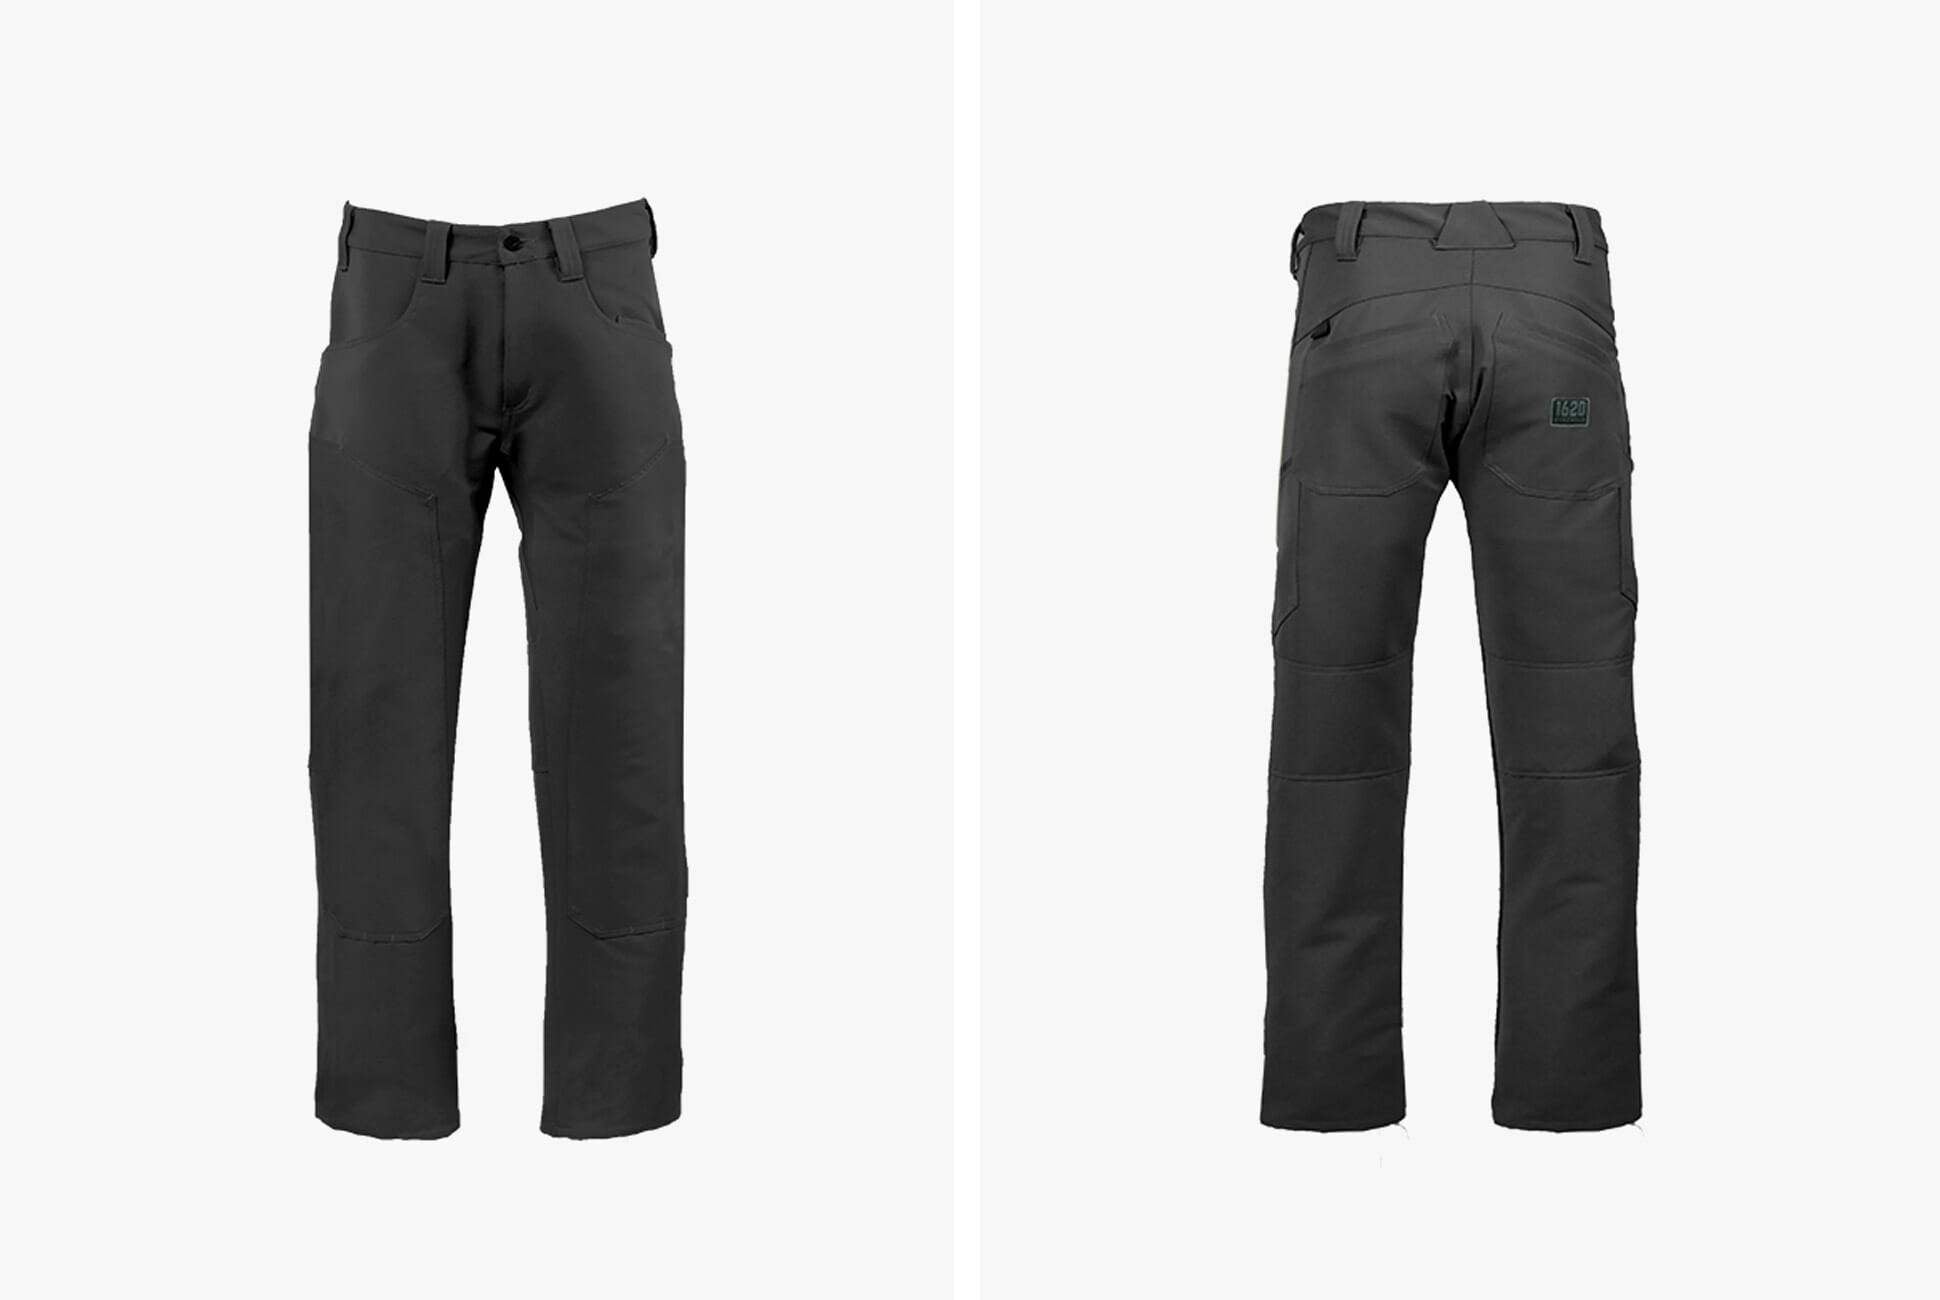 1620 Workwear Beats Carhartt at Its Own Game, Again: Gear Patrol Review